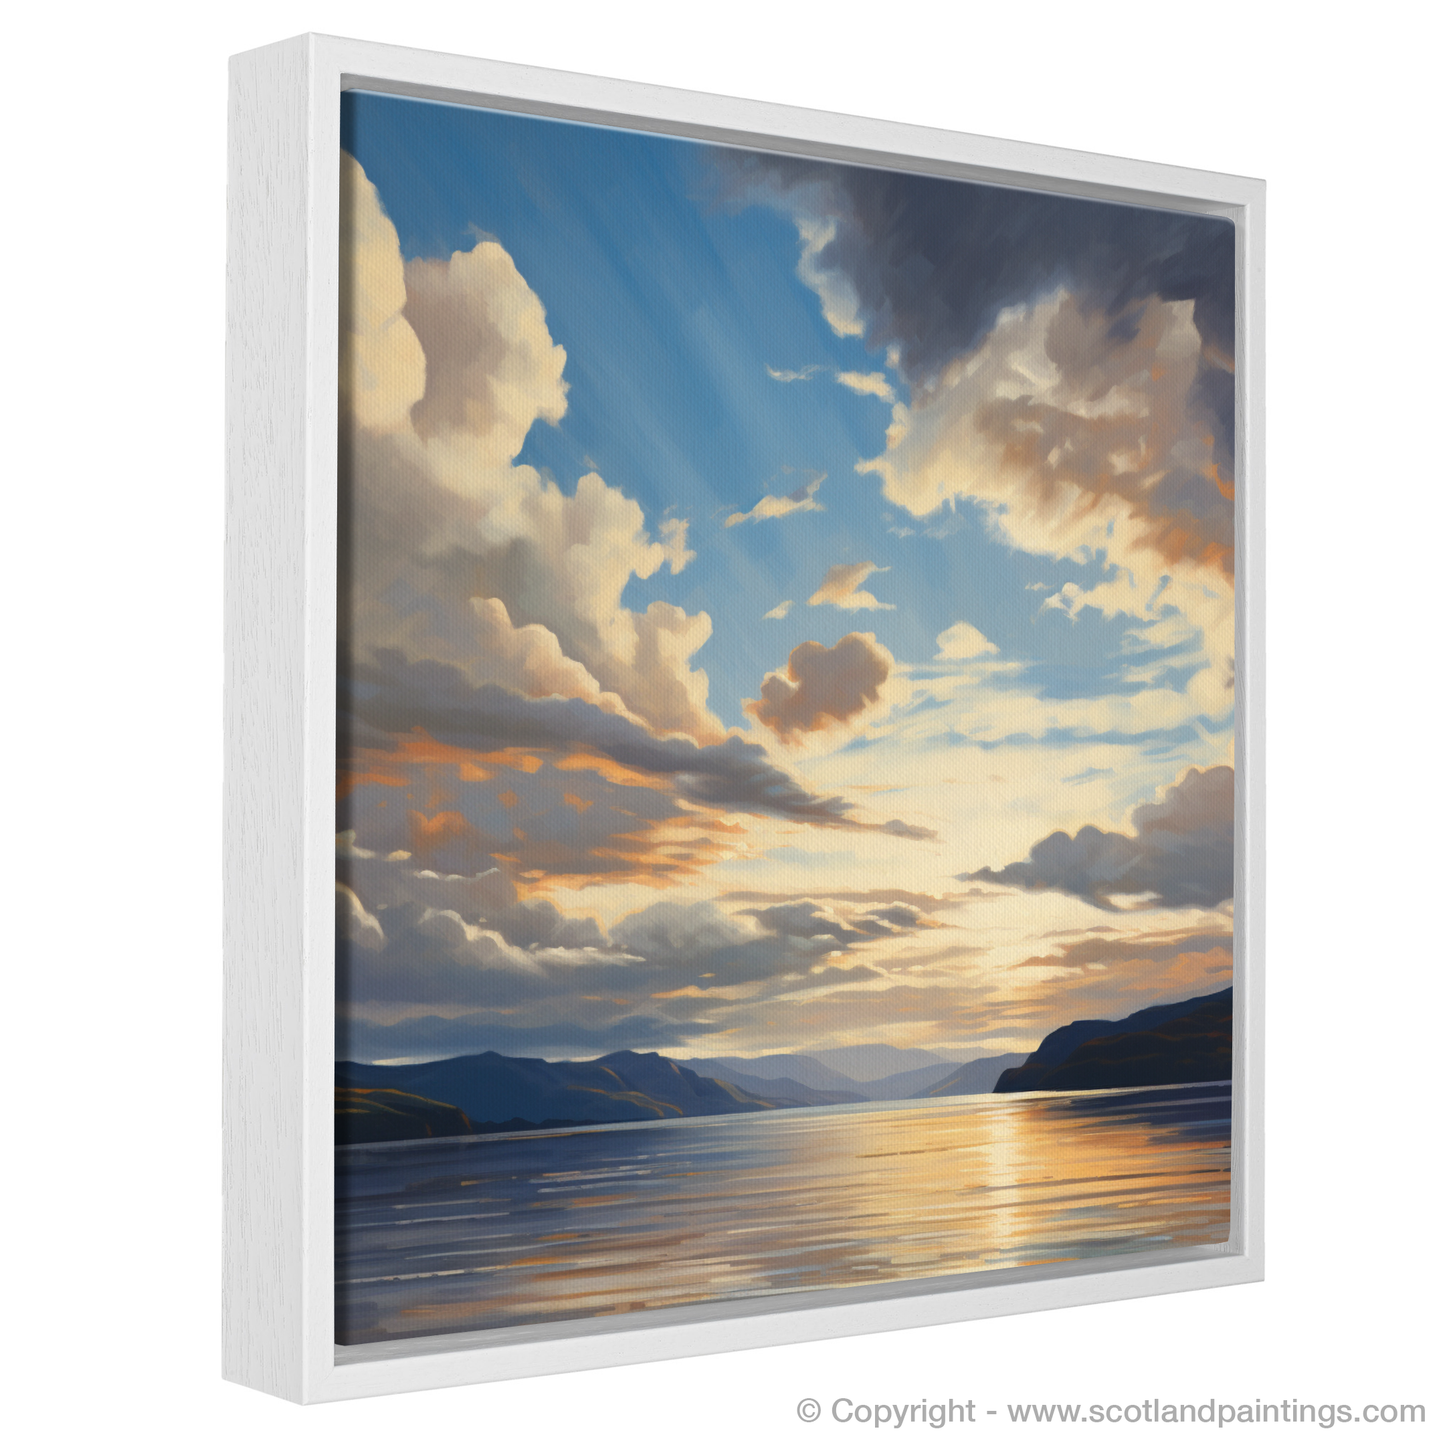 Painting and Art Print of A huge sky above Loch Lomond entitled "Majestic Skies Over Loch Lomond".